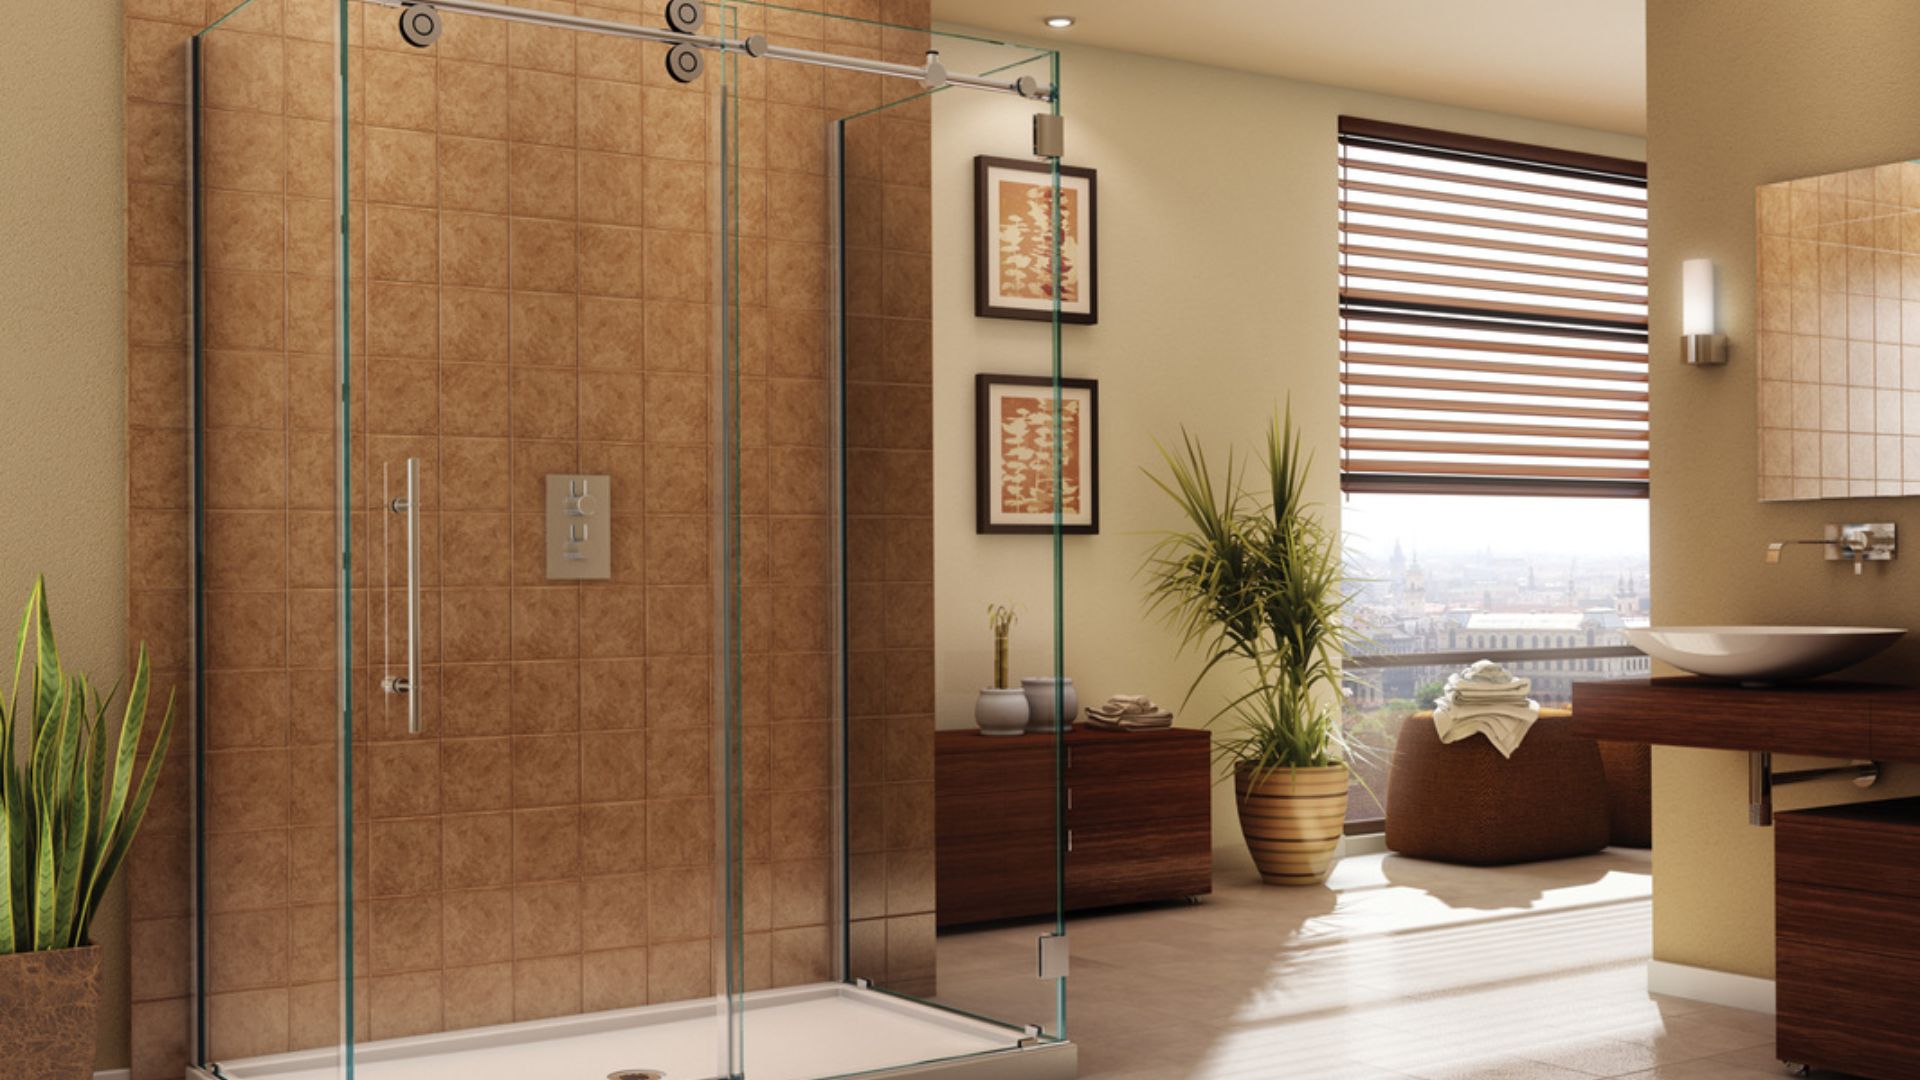 The Practical Reasons Why Shower Enclosures Matter